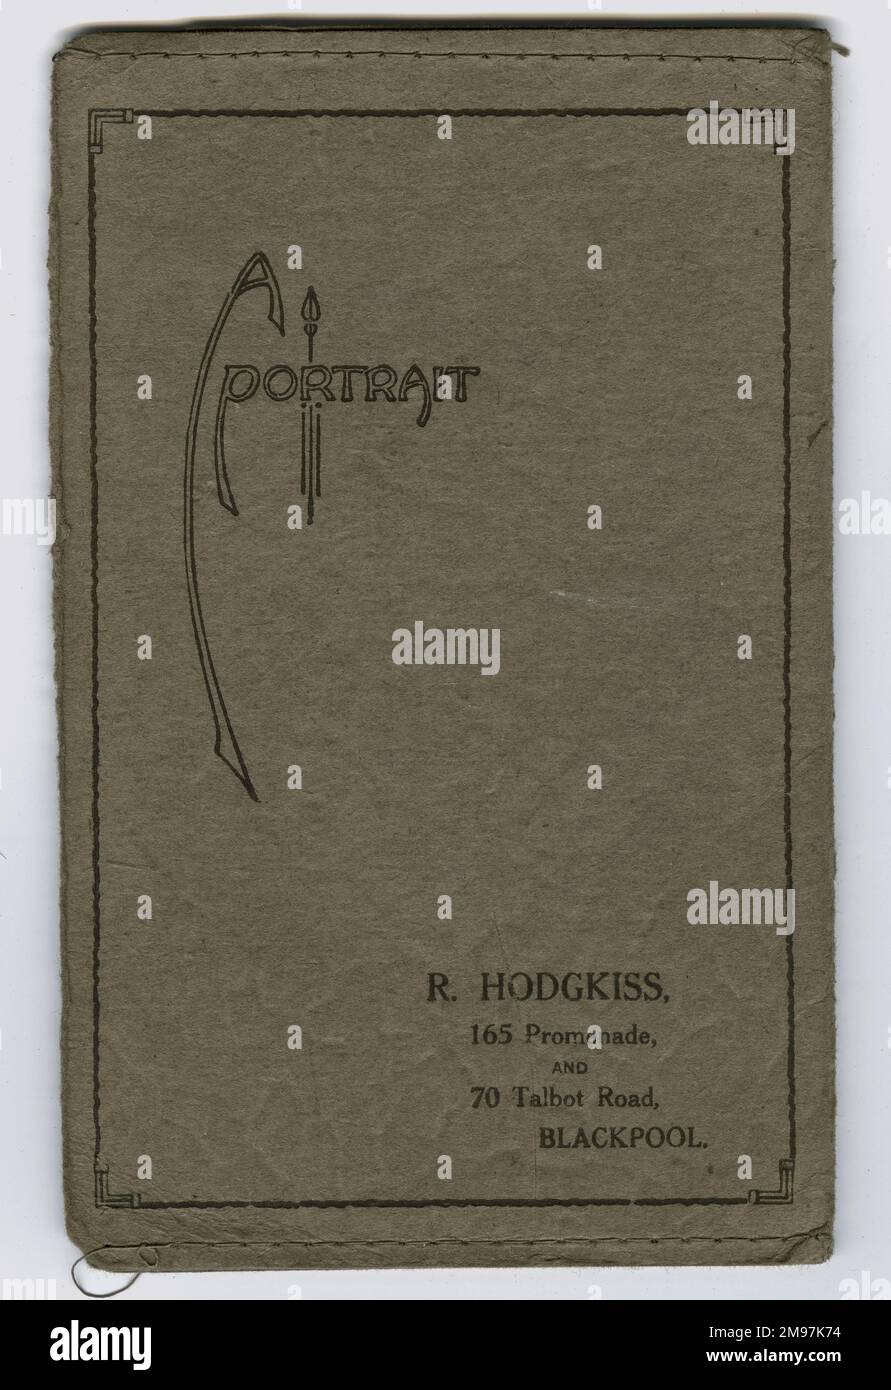 Photographic portrait wallet from the studio of R Hodgkiss of The Promenade and Talbot Road, Blackpool. Stock Photo